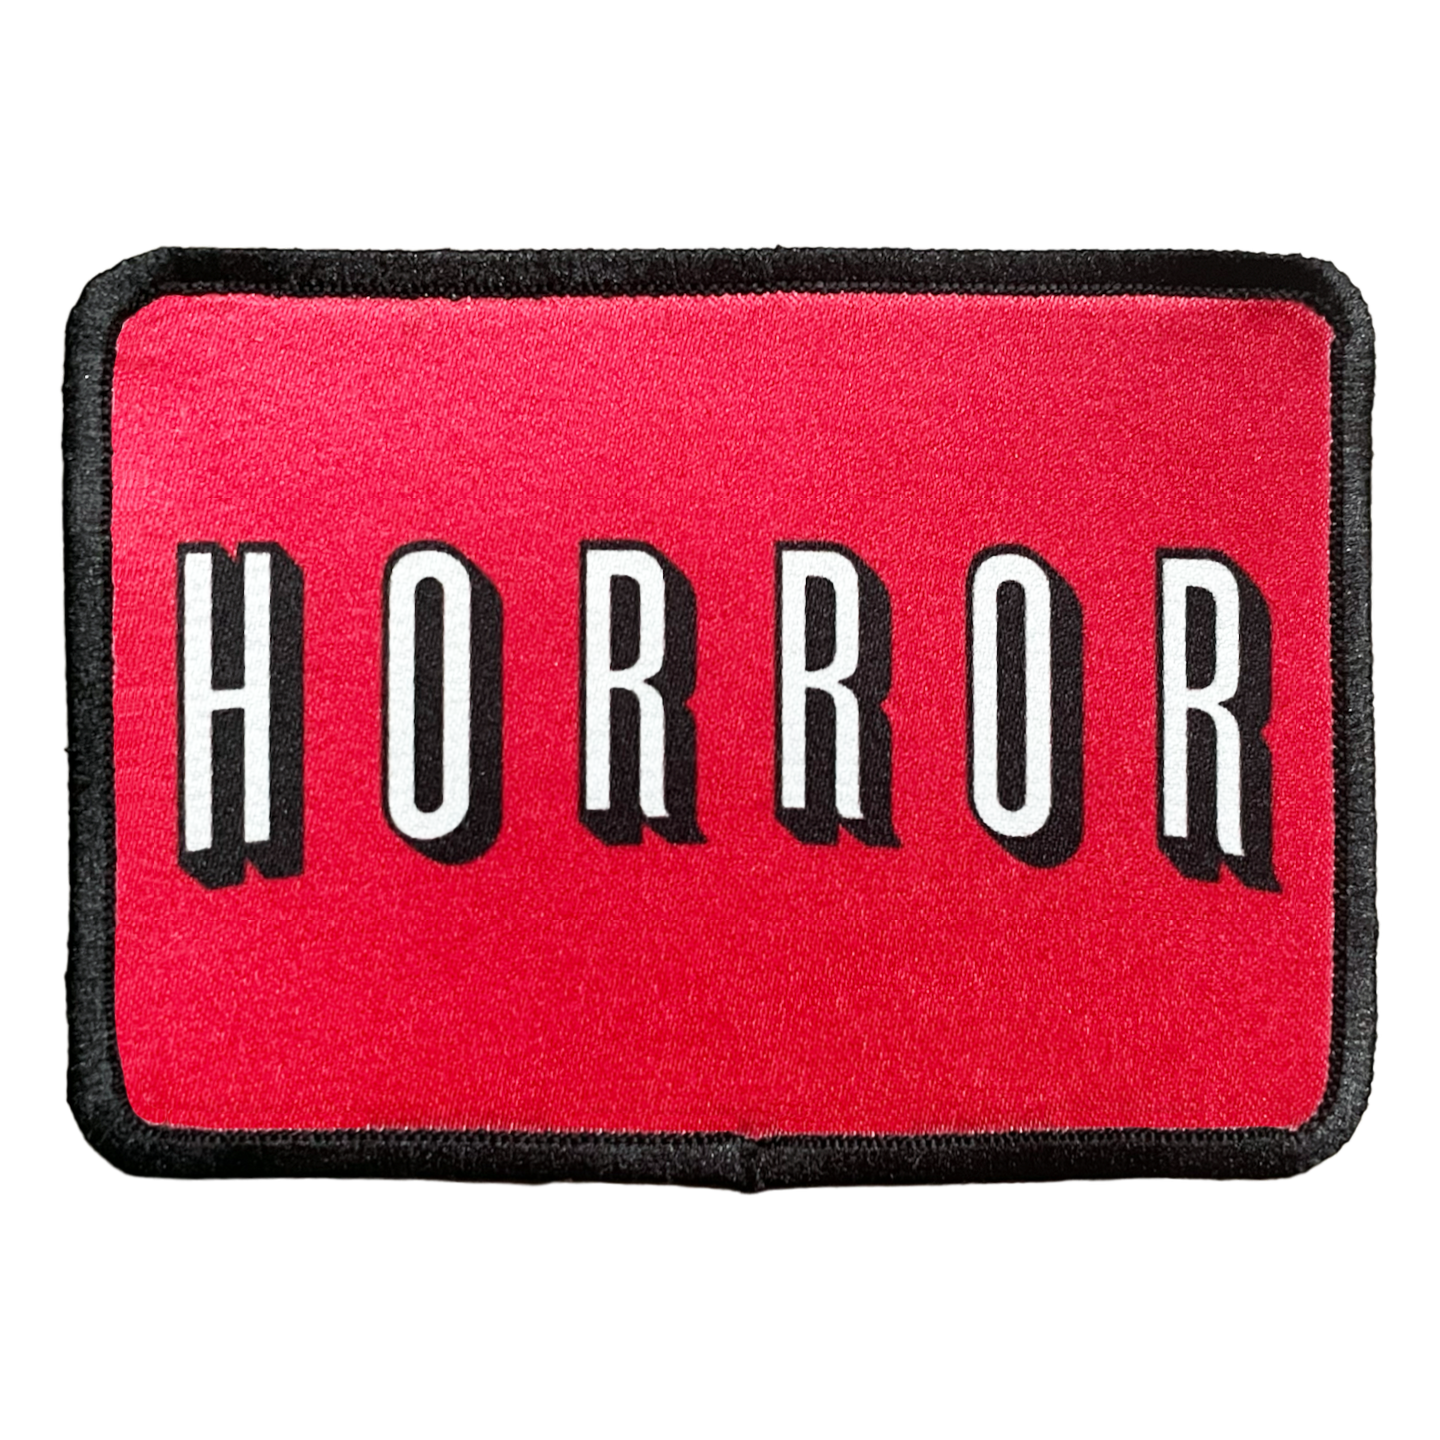 Horror Flix Iron-On Patch